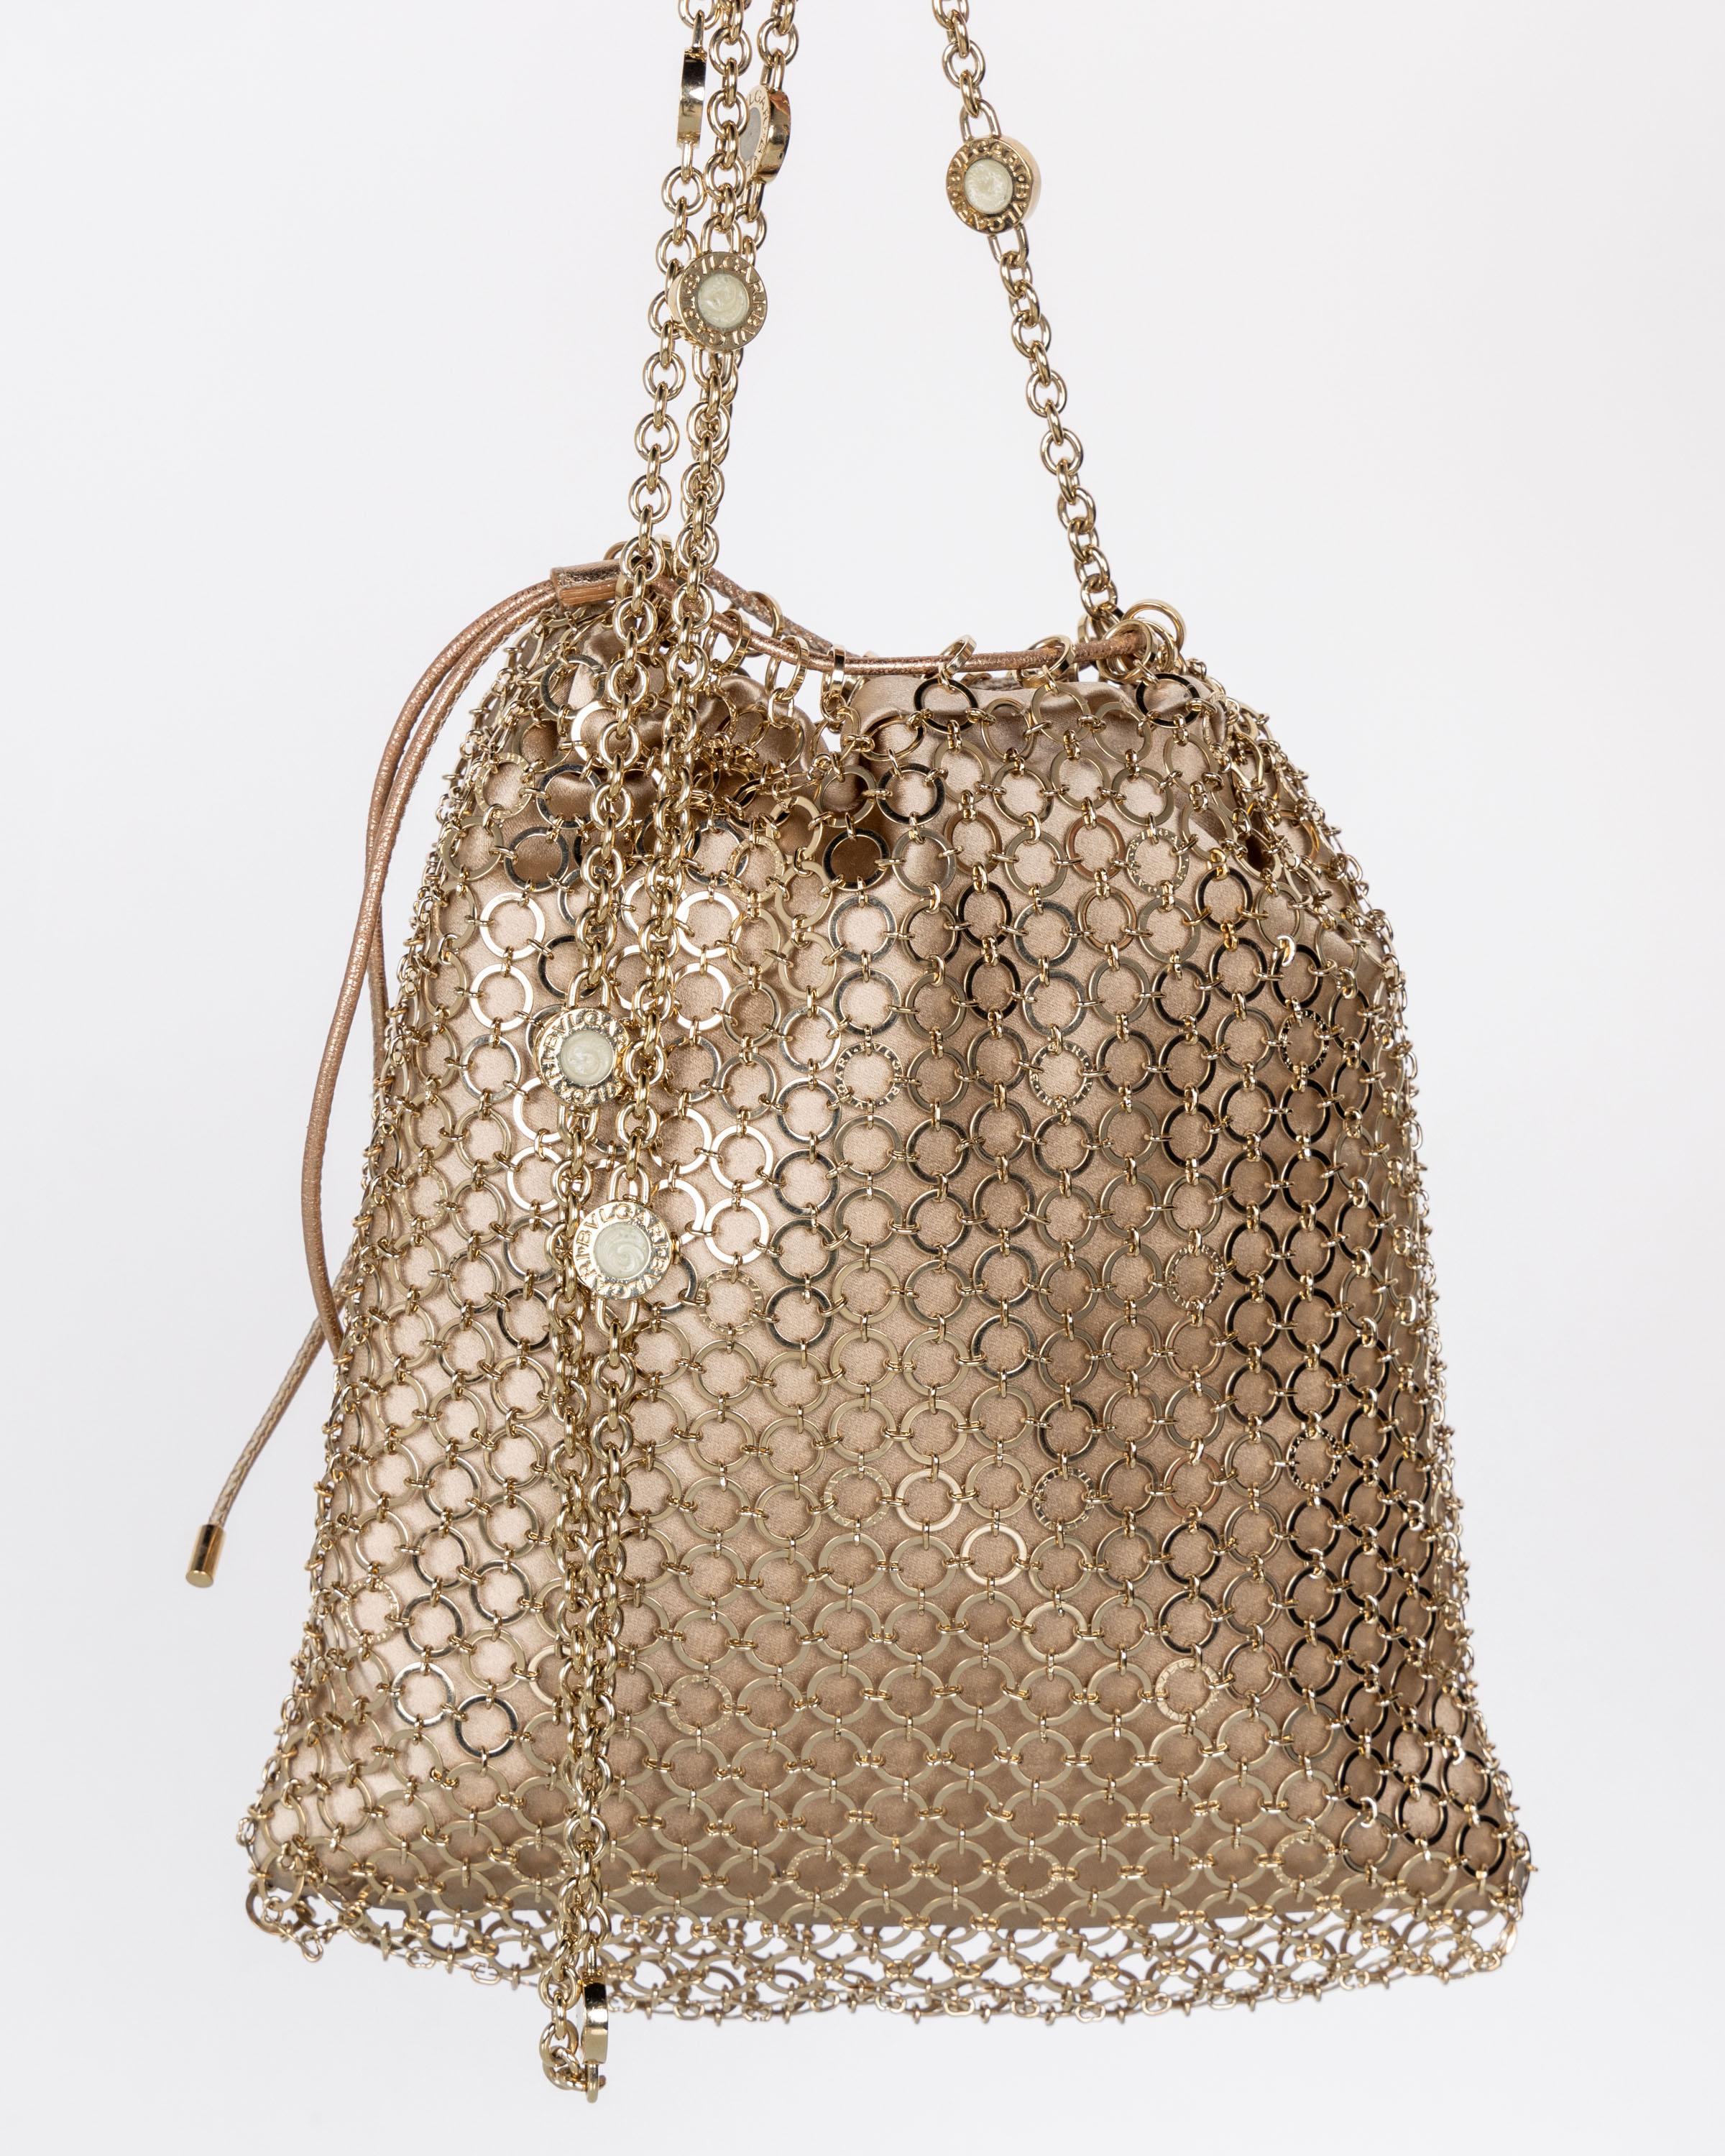 Bvlgari Gold Metal Mesh Long Chain Bag  In Excellent Condition For Sale In Boca Raton, FL